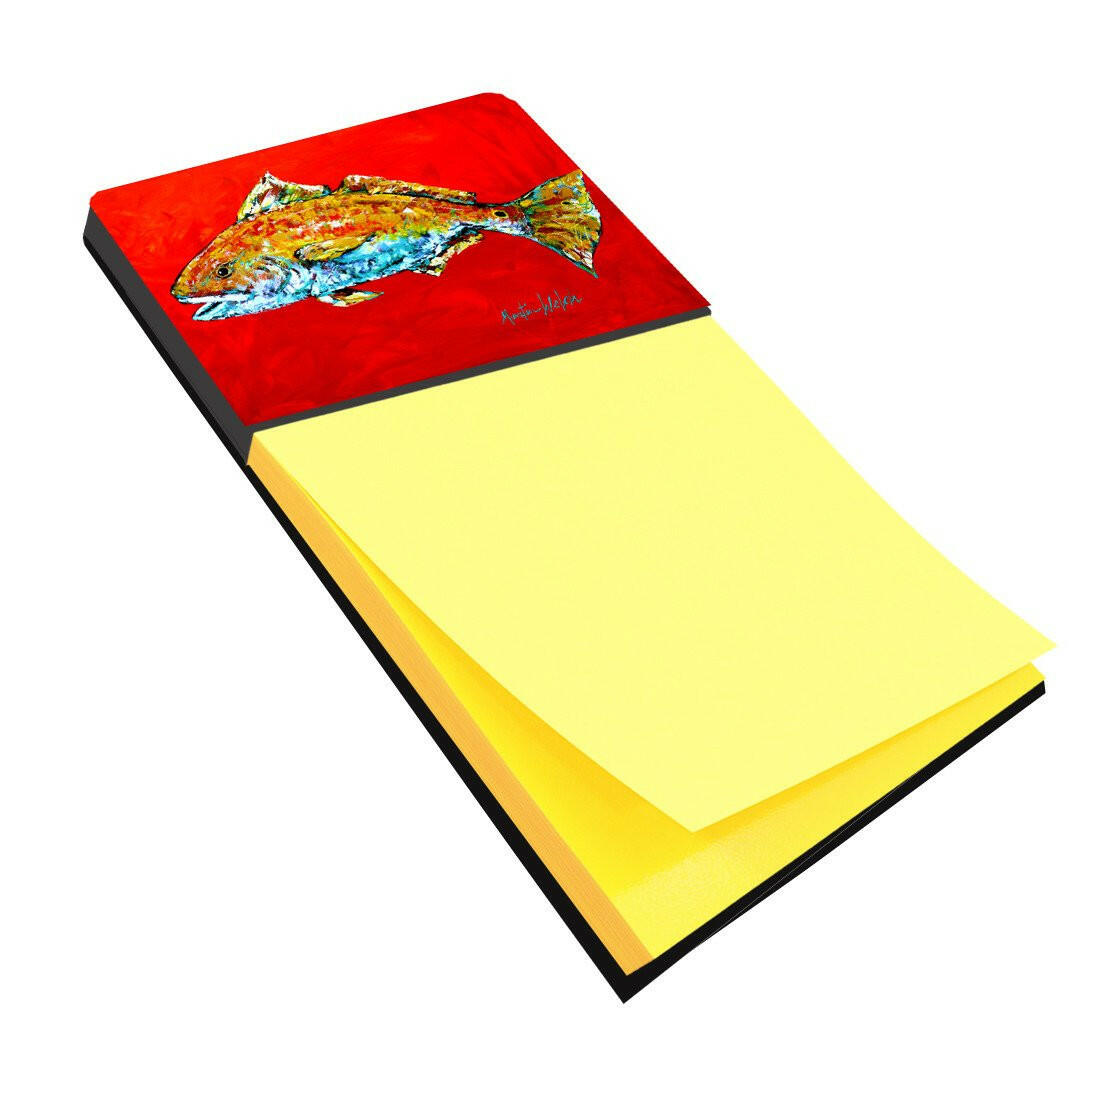 Fish - Red Fish Red Head Refiillable Sticky Note Holder or Postit Note Dispenser MW1111SN by Caroline's Treasures